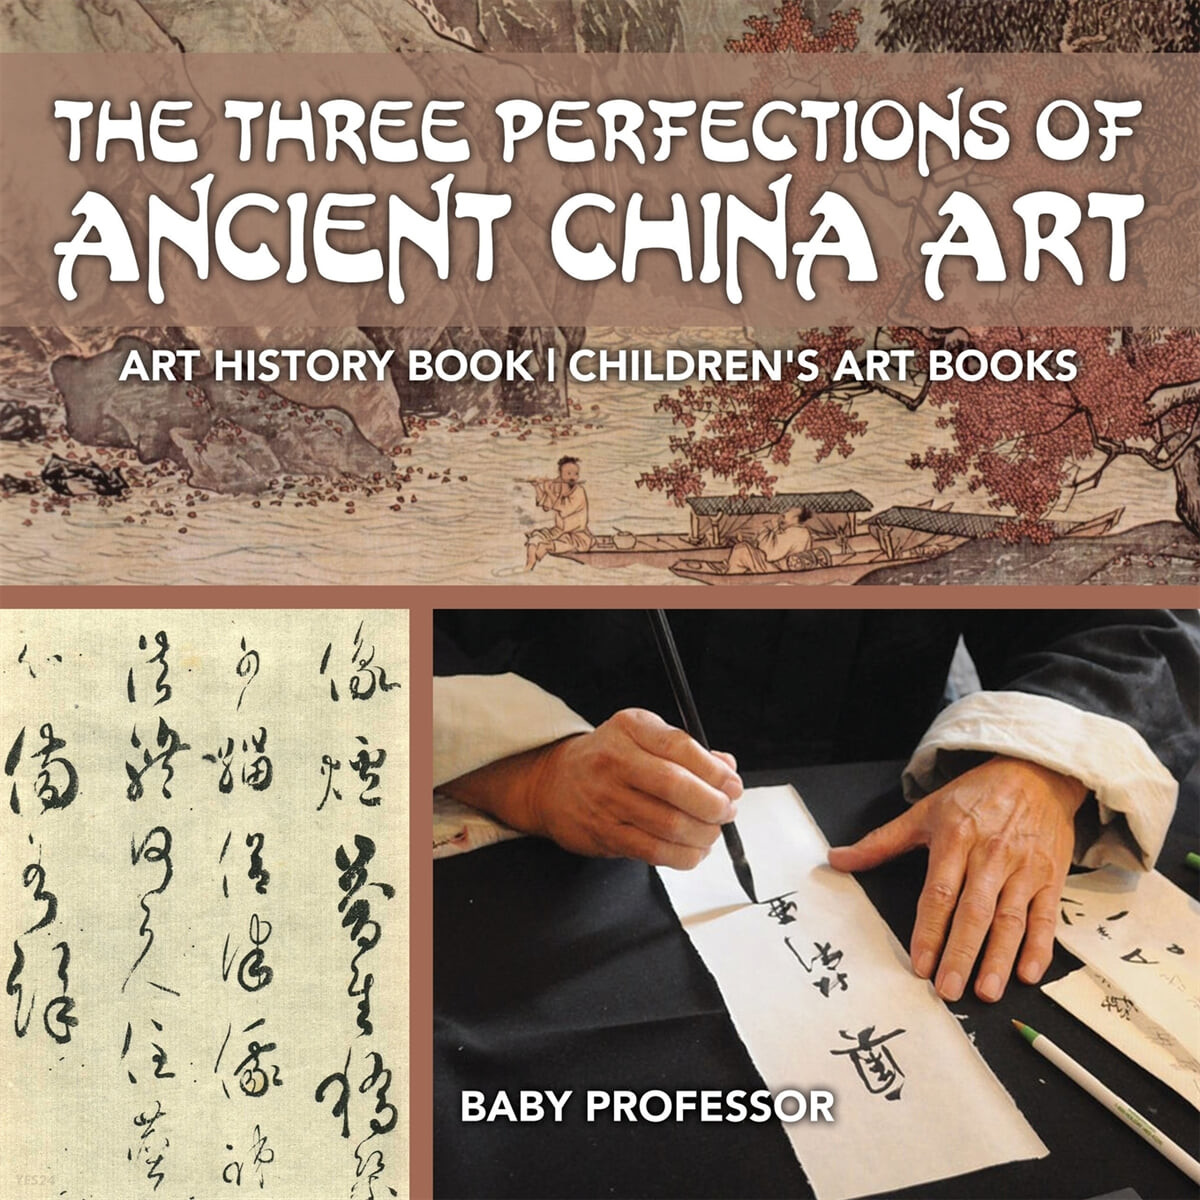 The Three Perfections of Ancient China Art - Art History Book - Children’s Art Books